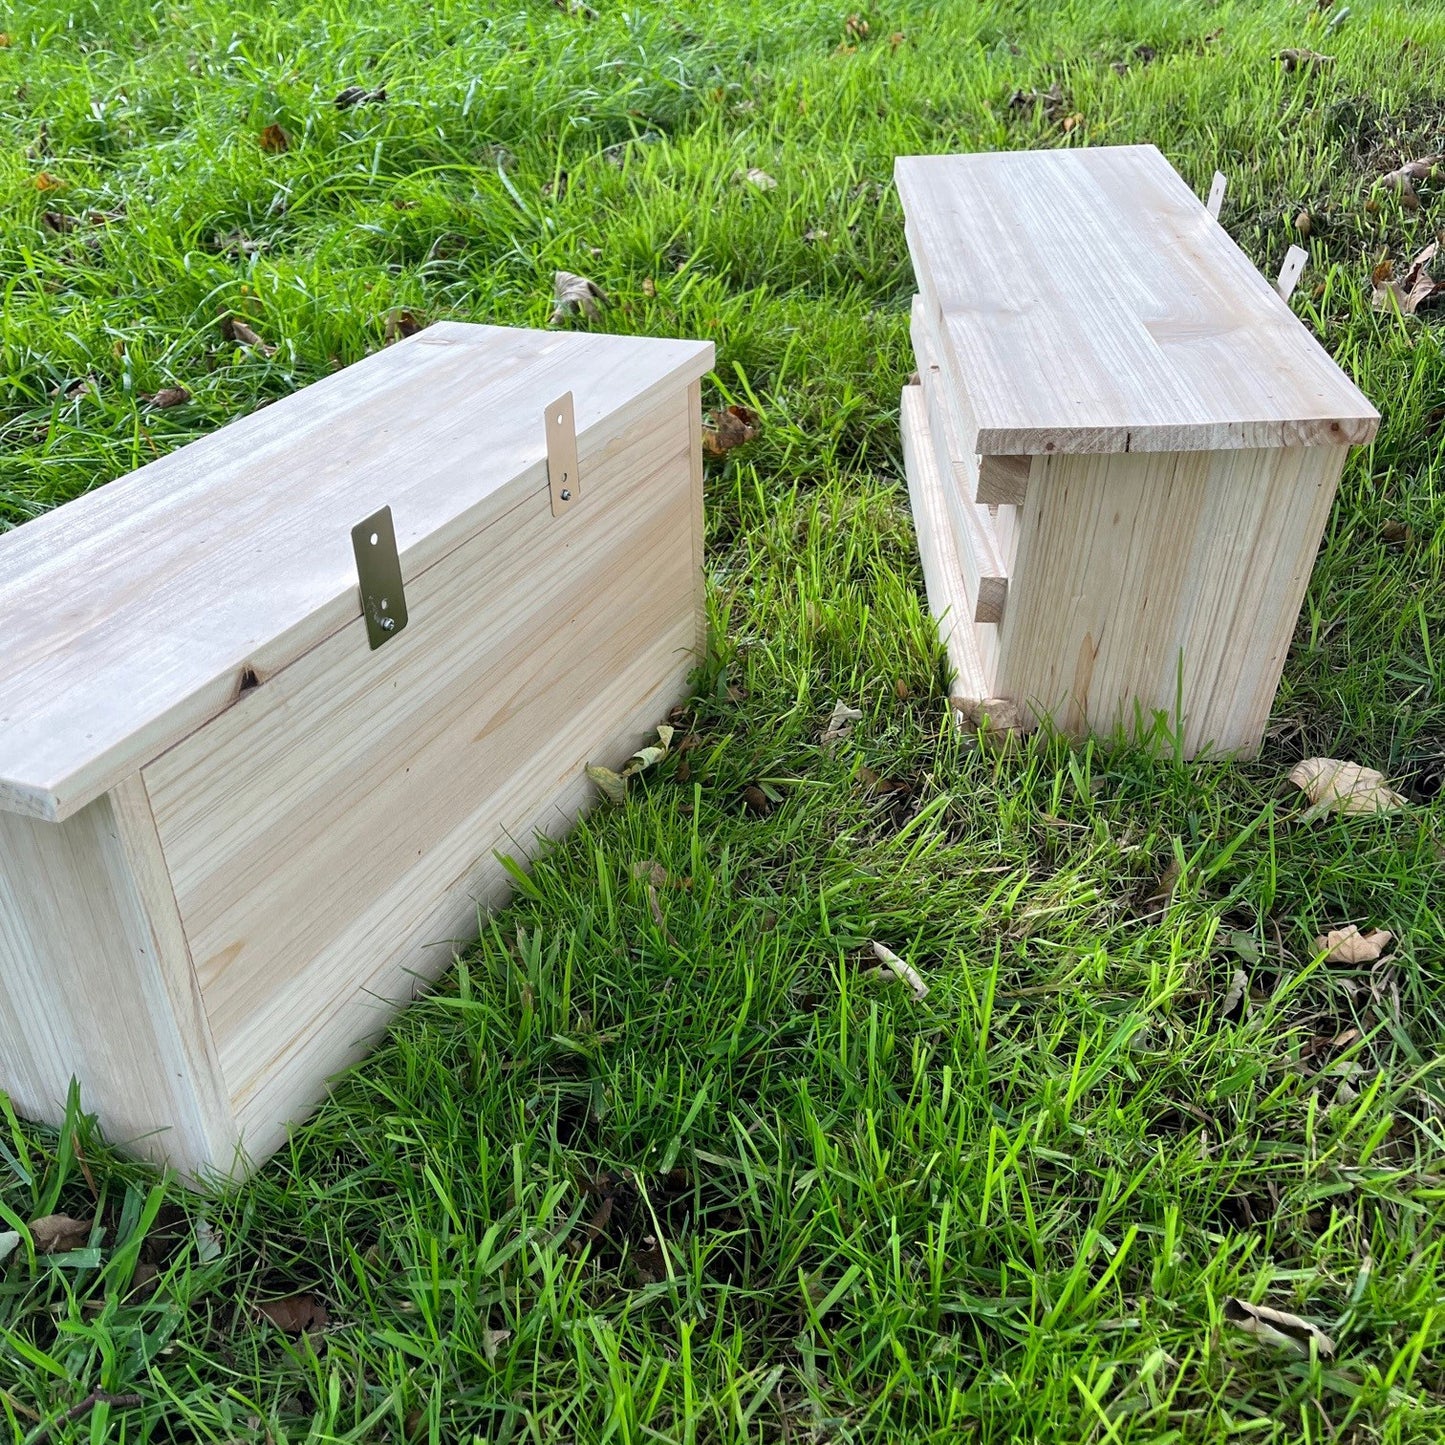 Sparrow Colony Terrace Wooden Nesting Box with Removable Nest Fronts (Set of 2)